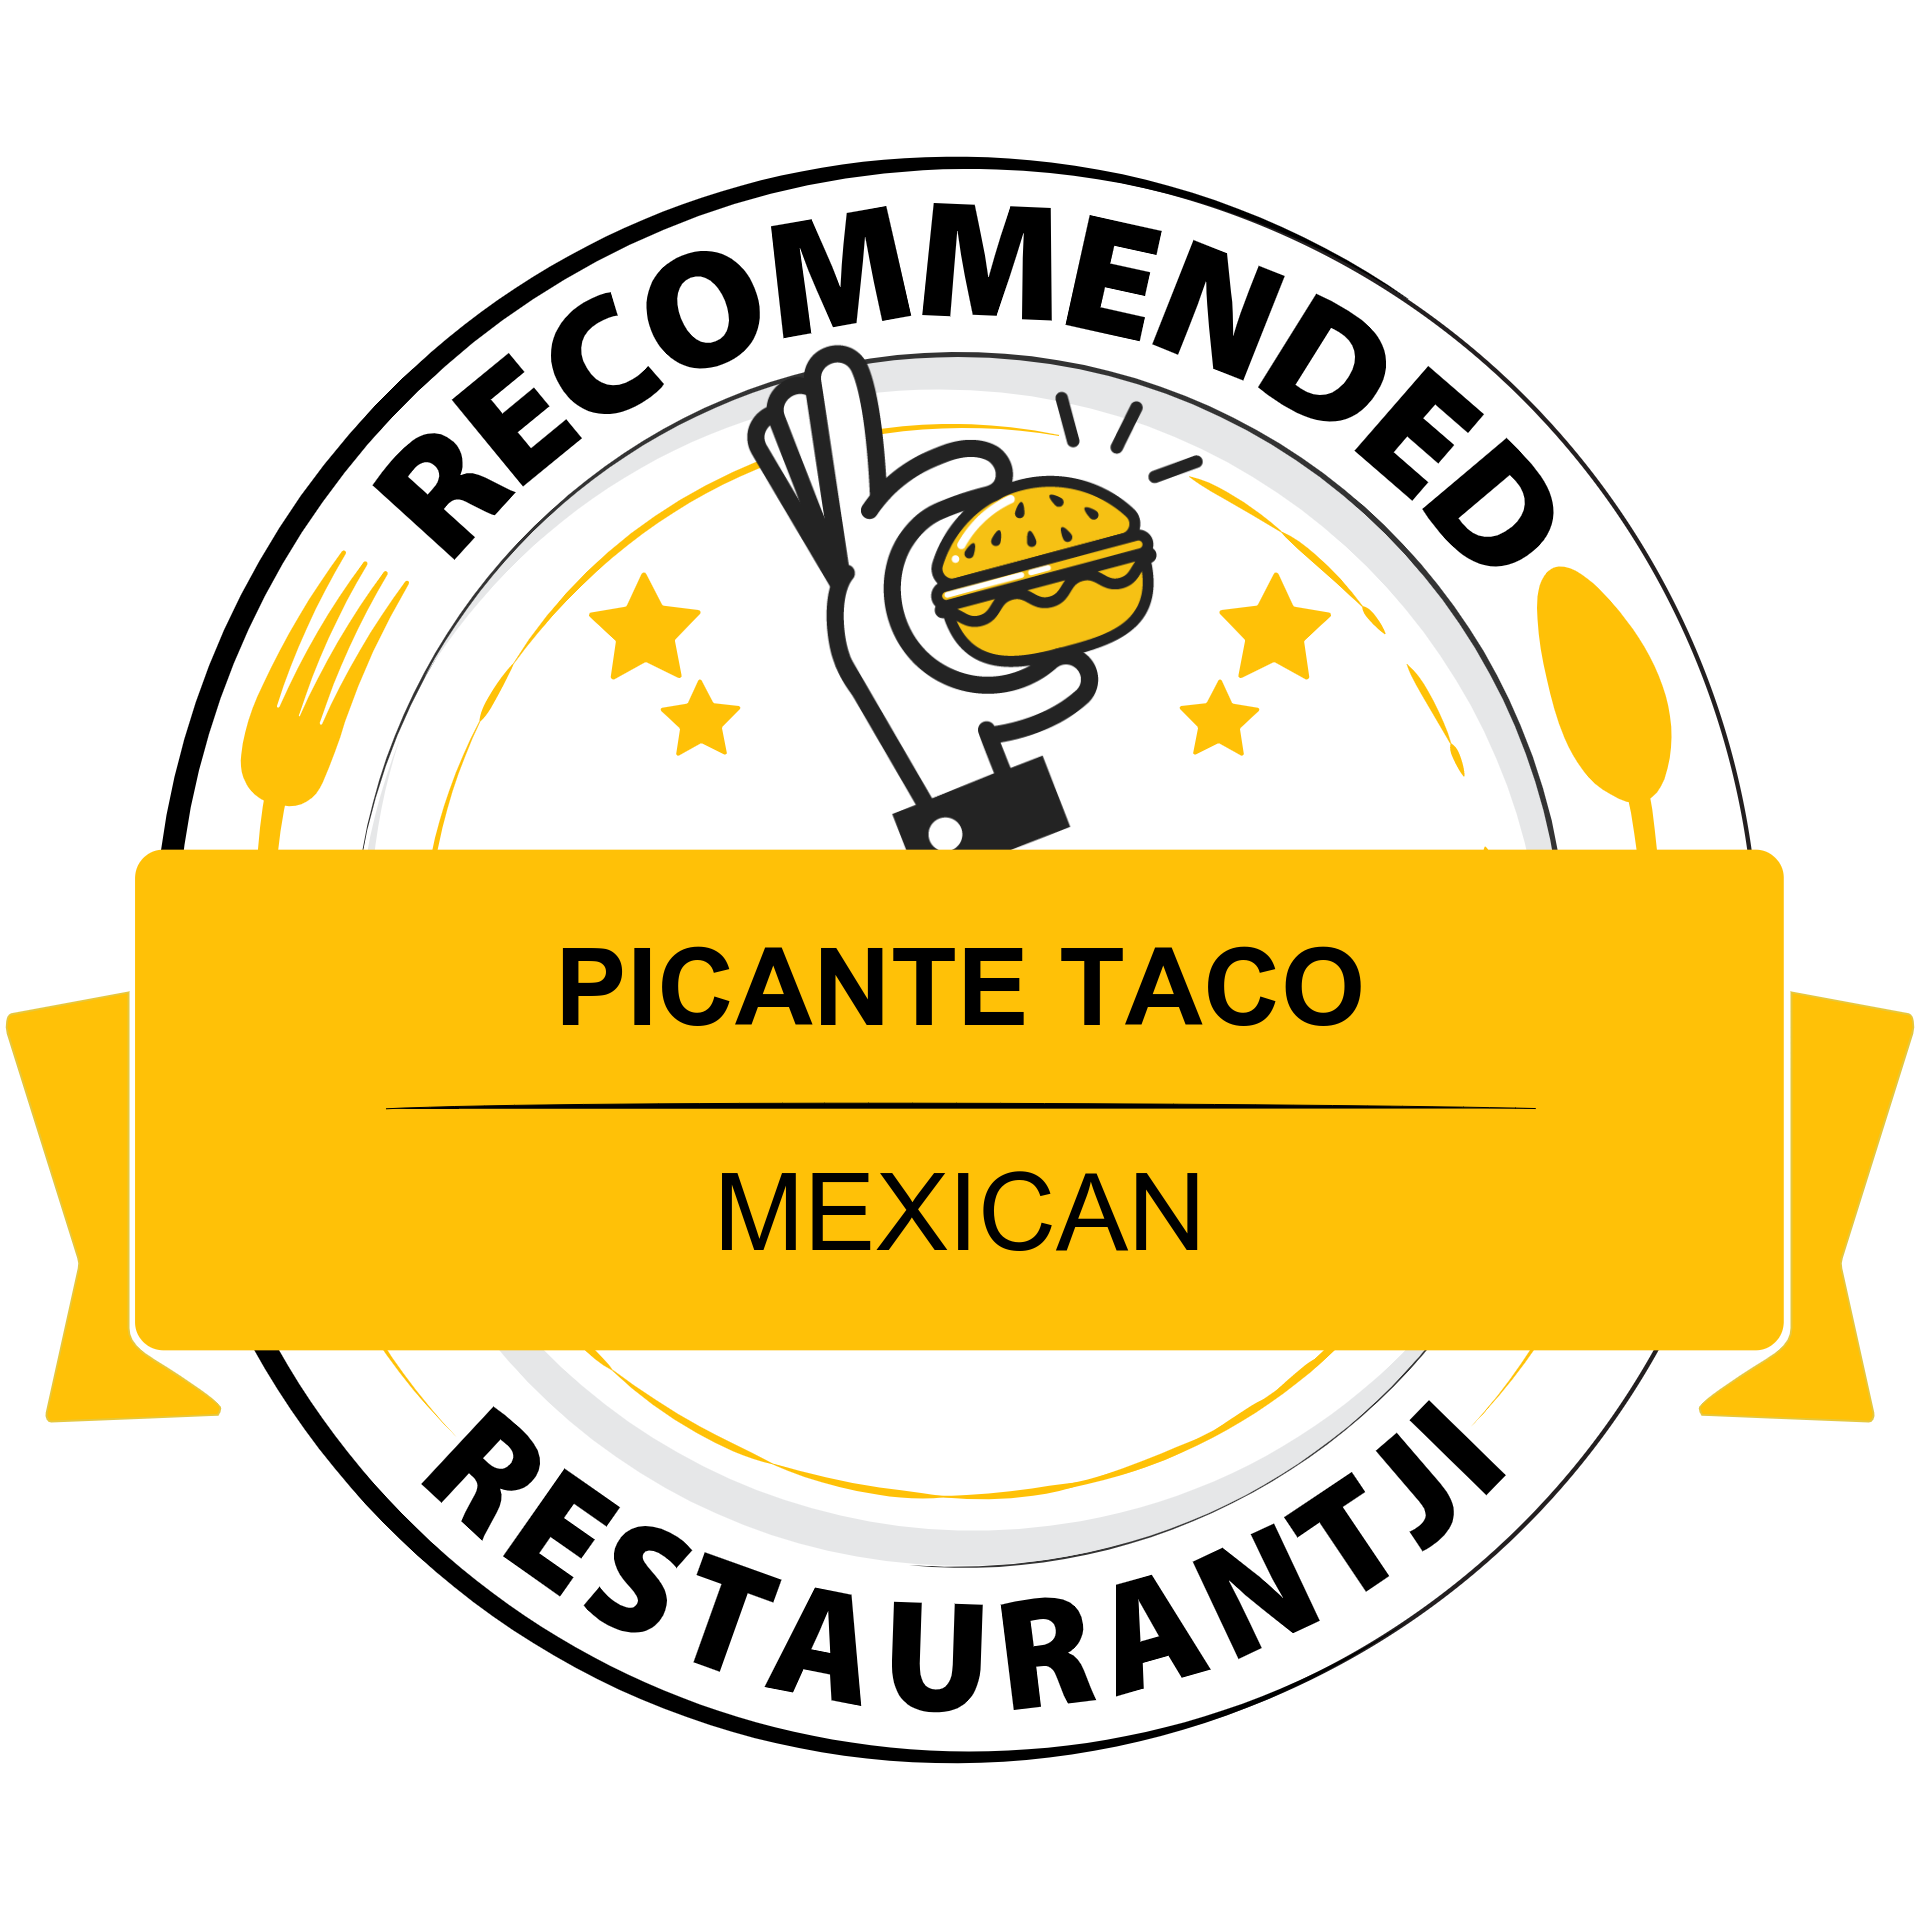 Picante Taco has earned accolades from Restaurantji - a user-friendly platform for discovering the finest local restaurants.